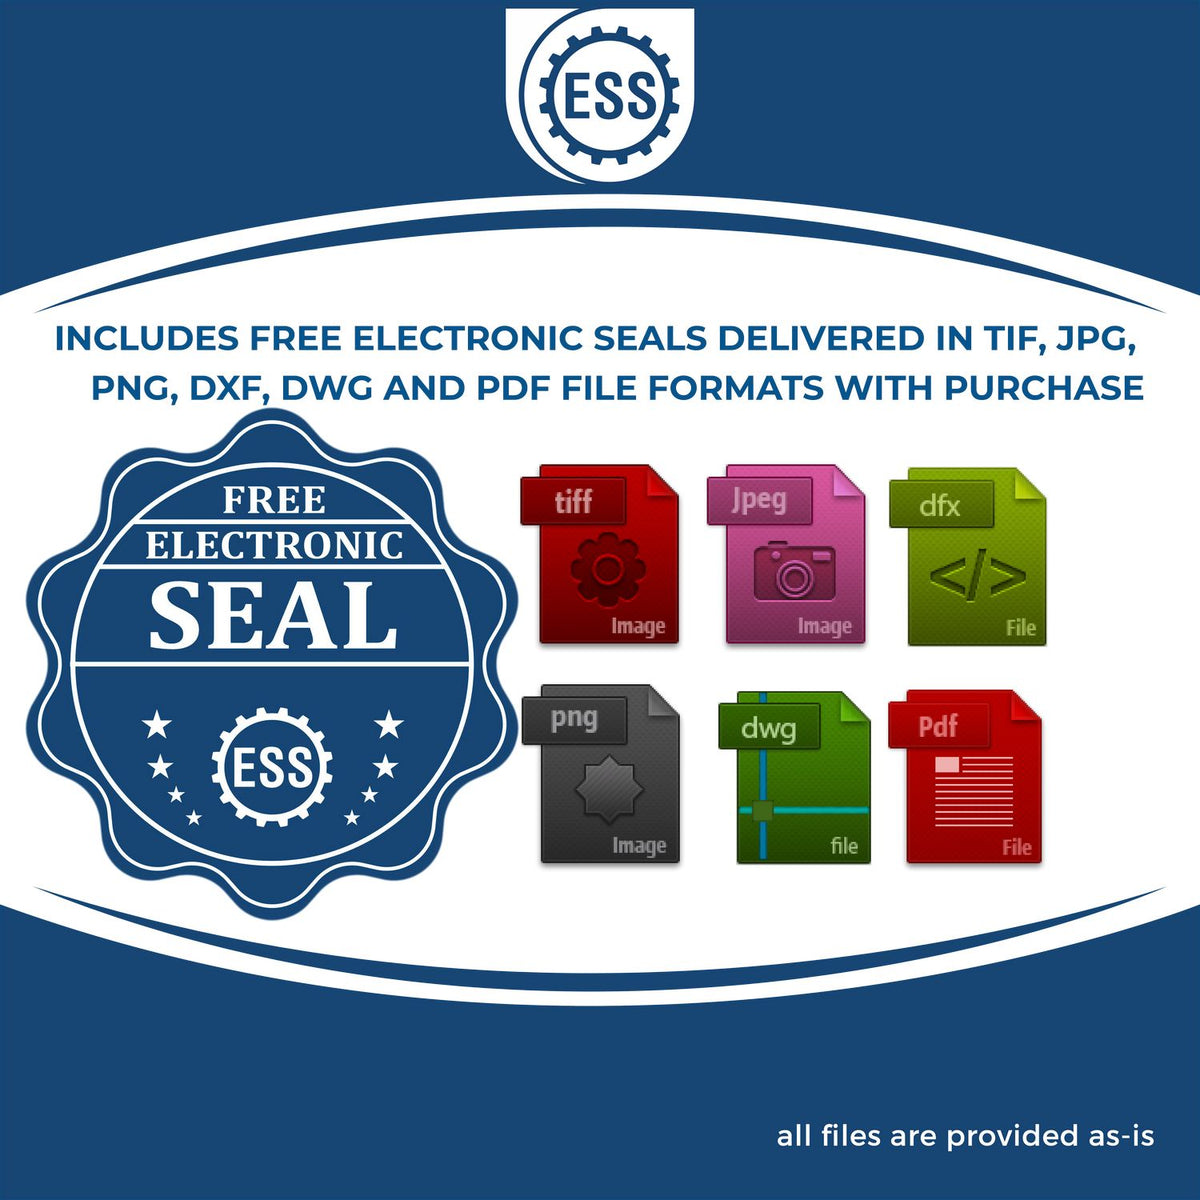 An infographic for the free electronic seal for the Gift Utah Geologist Seal illustrating the different file type icons such as DXF, DWG, TIF, JPG and PNG.